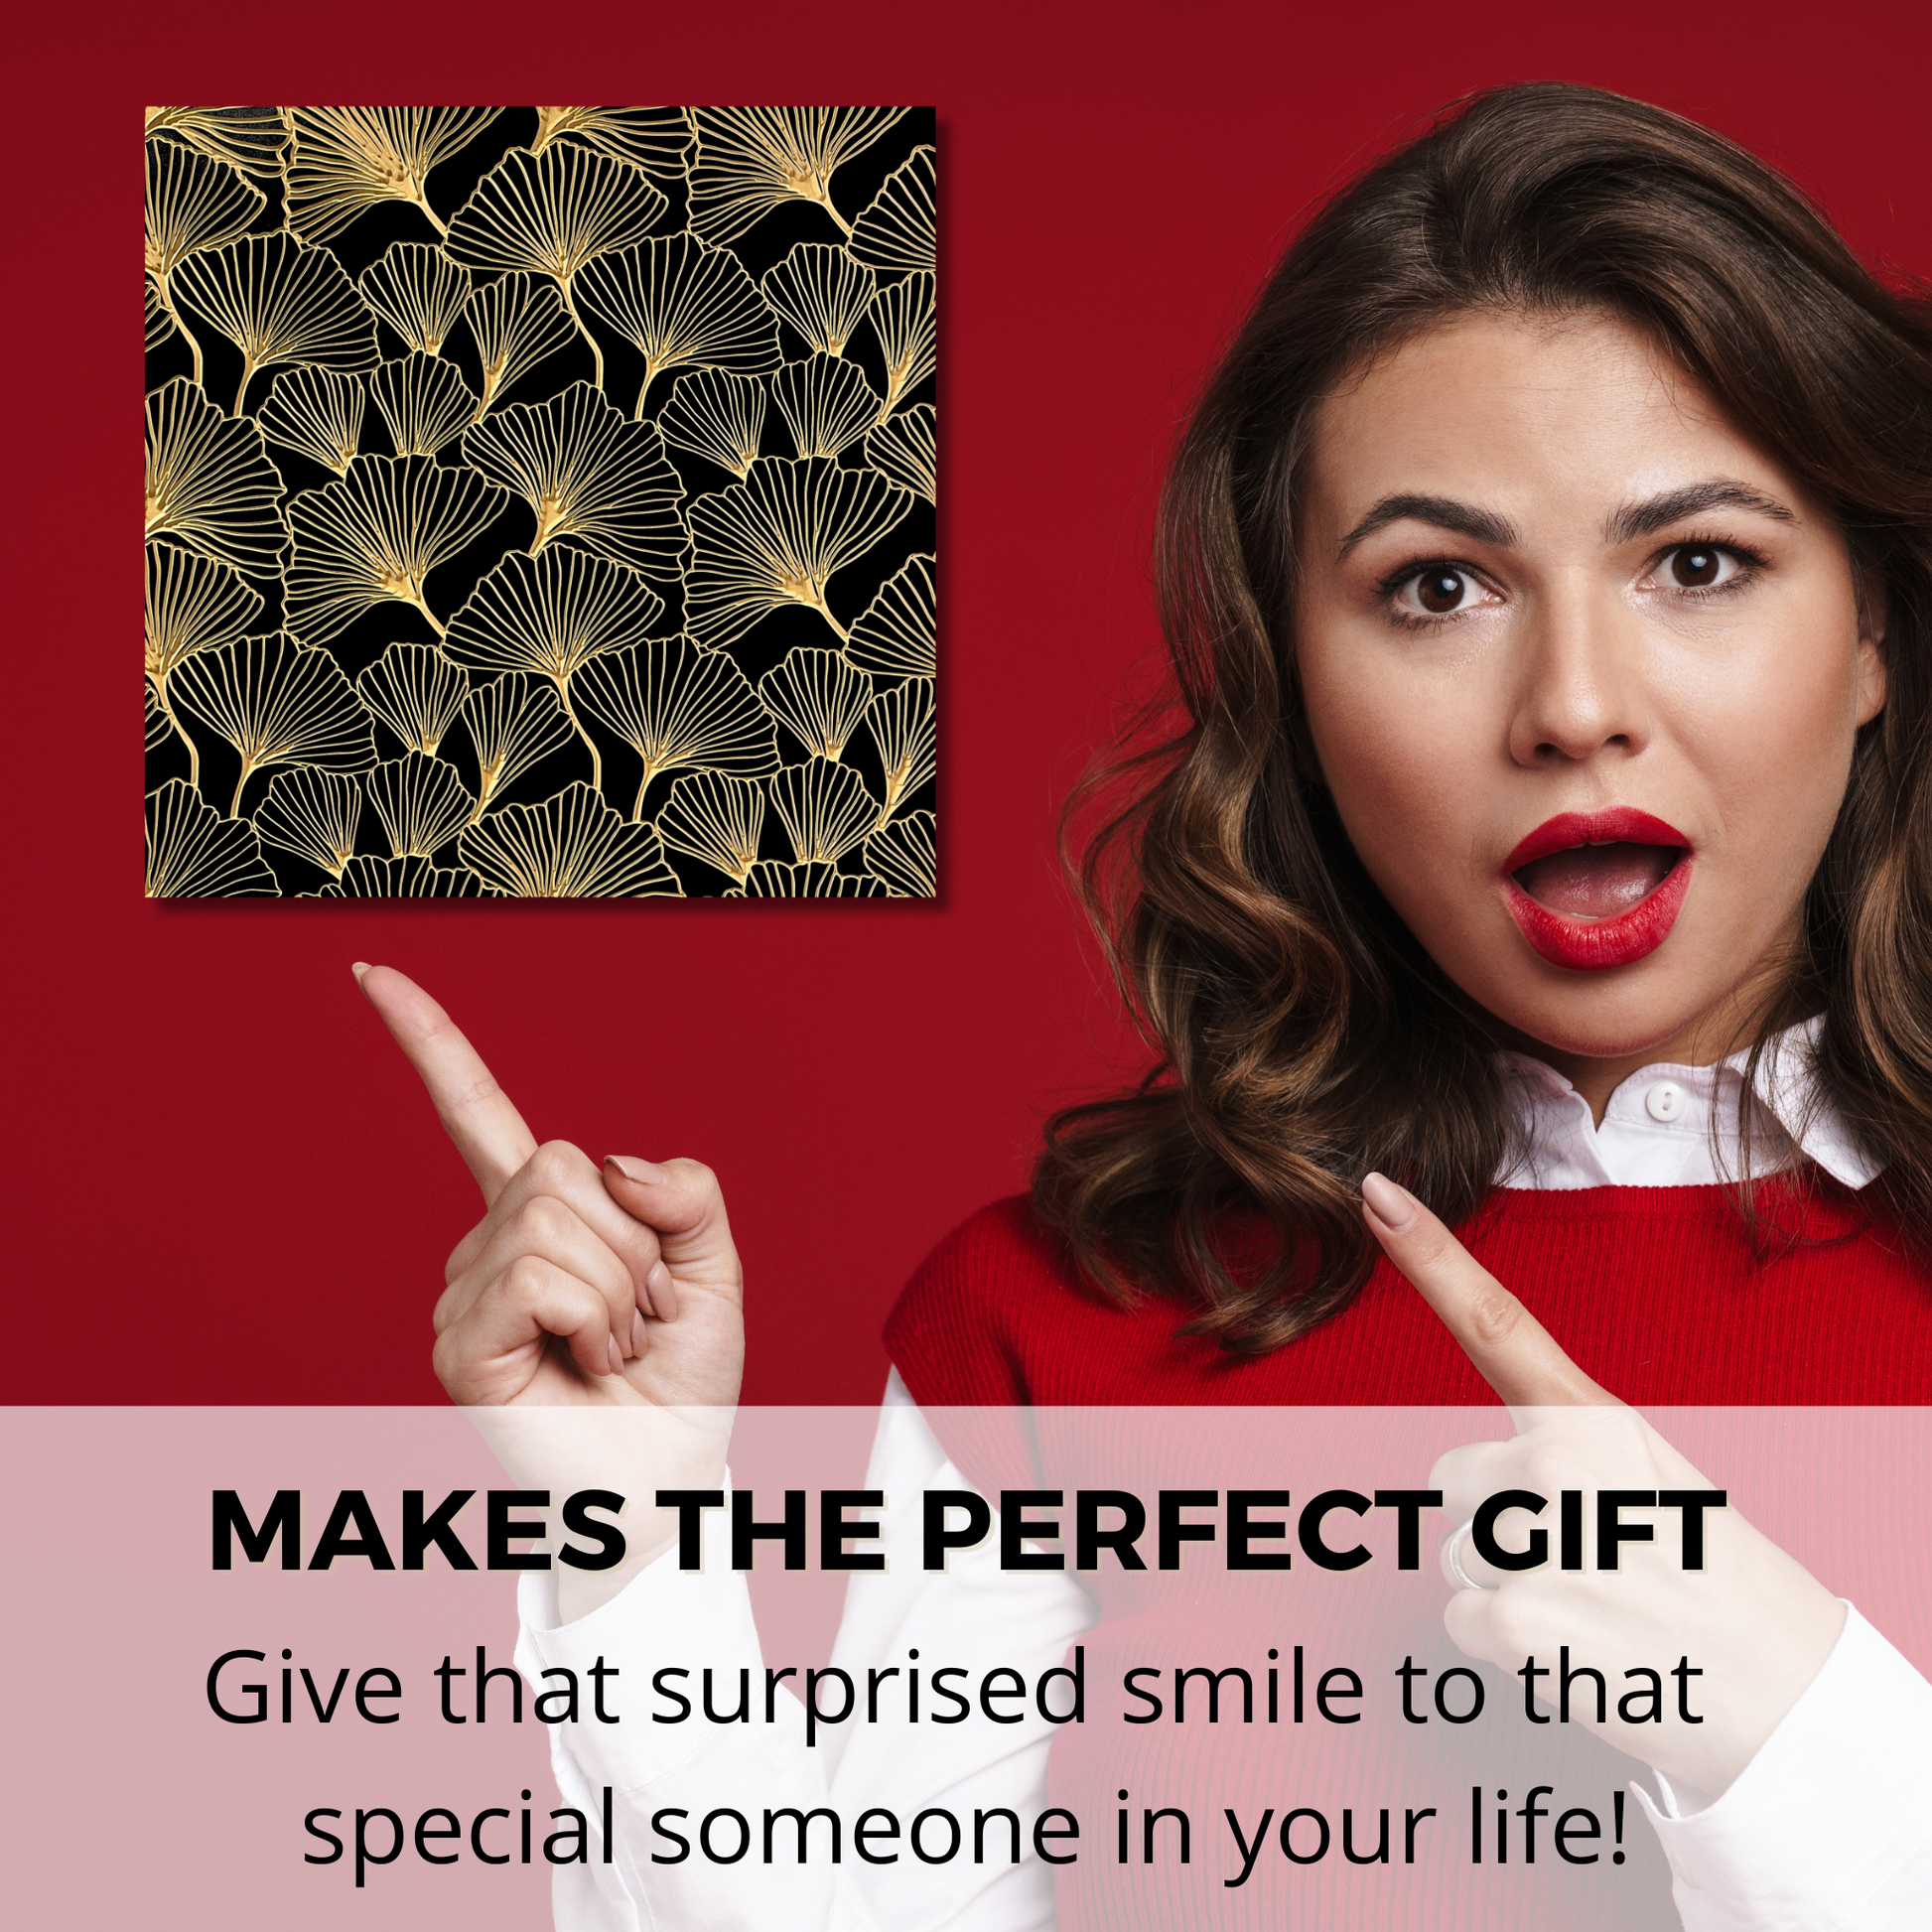 Ginkgo Wall Art makes a perfect gift